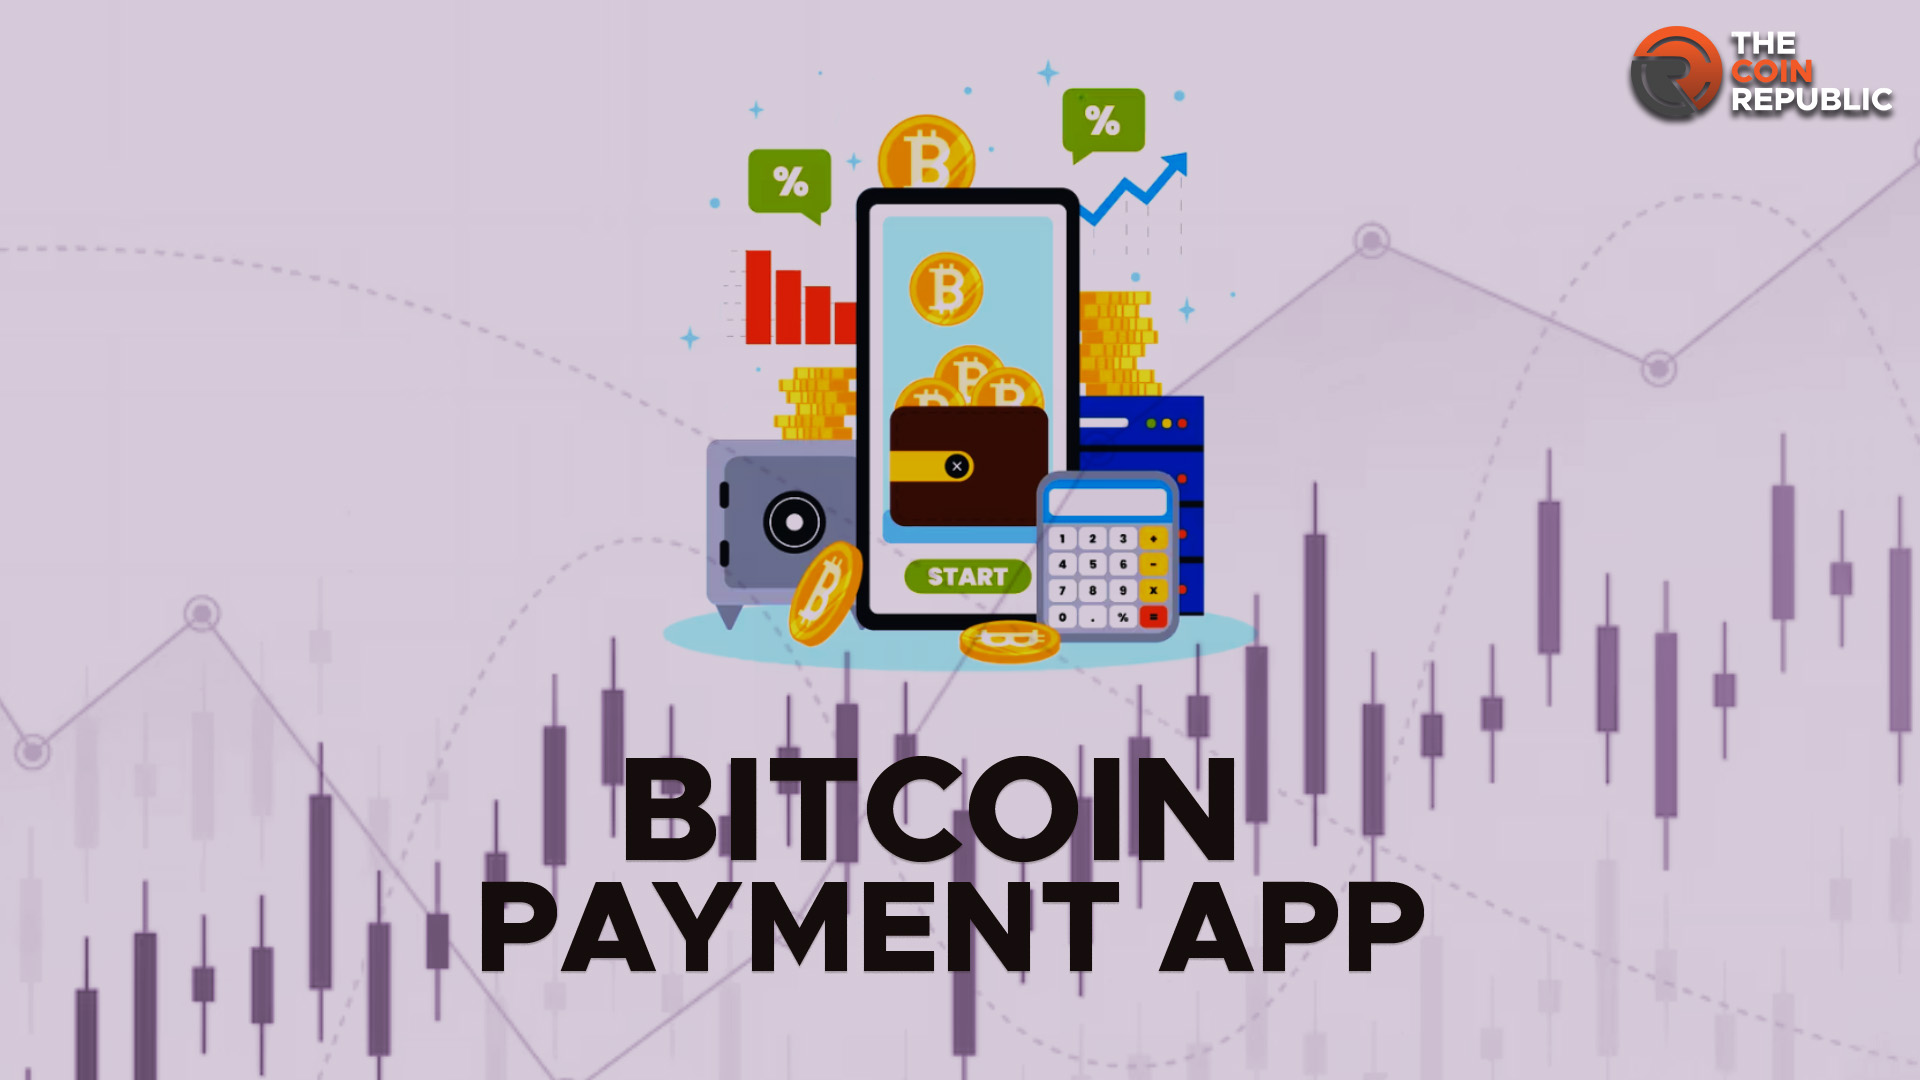 Bitcoin2023: Bitcoin Payments App Strike Expands to 65 Nations